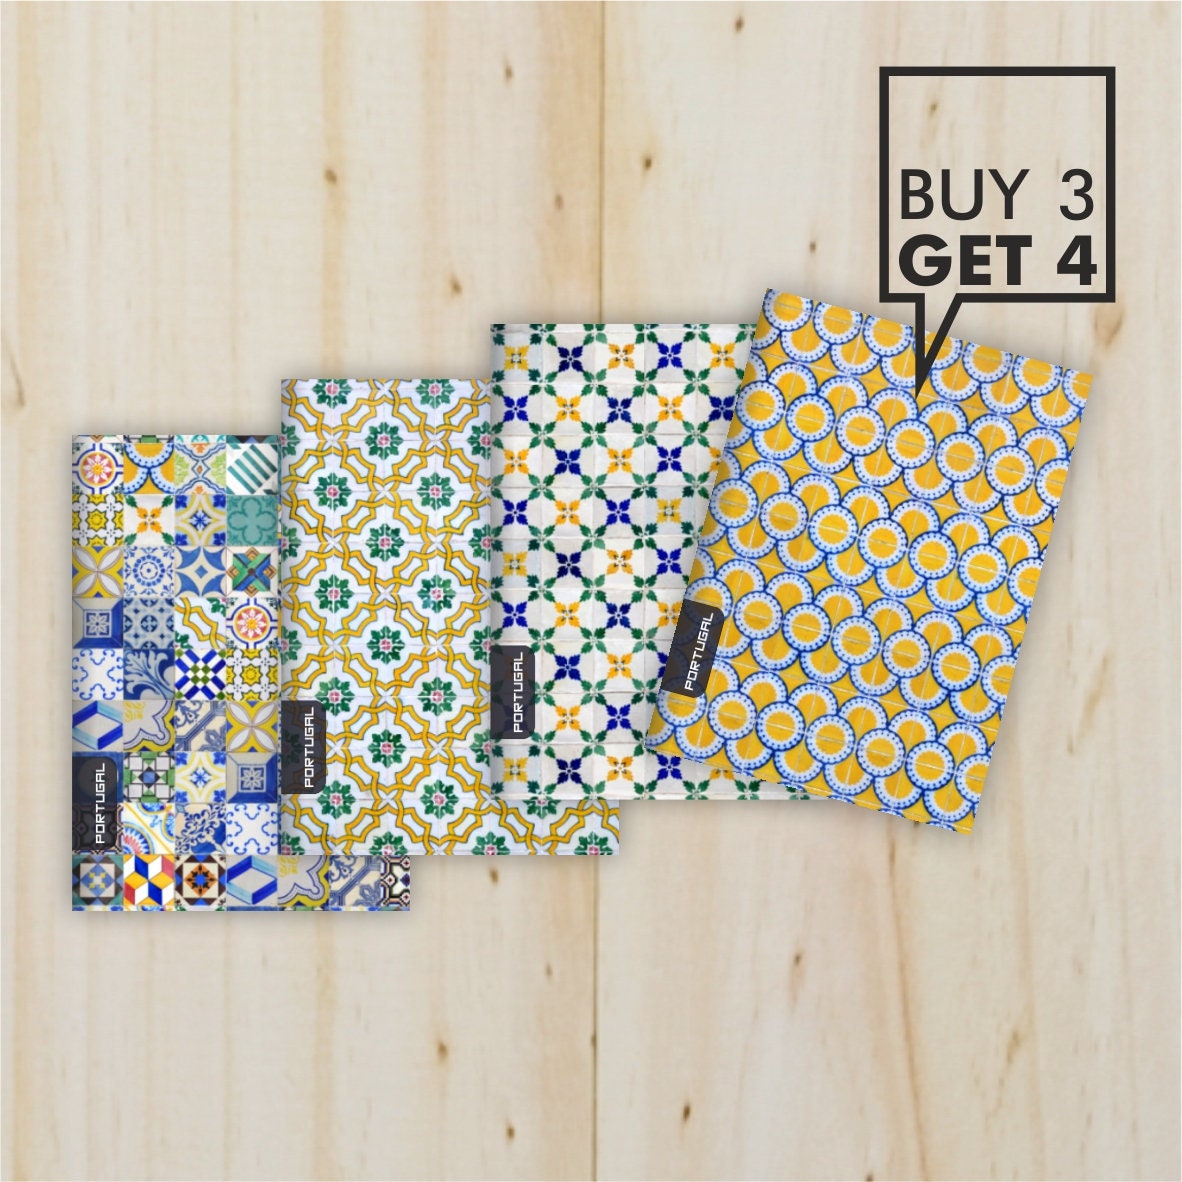 Buy 3 Get 4 Notebooks Inspired in The Portuguese Tiles, Eco Friendly Recycled Paper - Option B